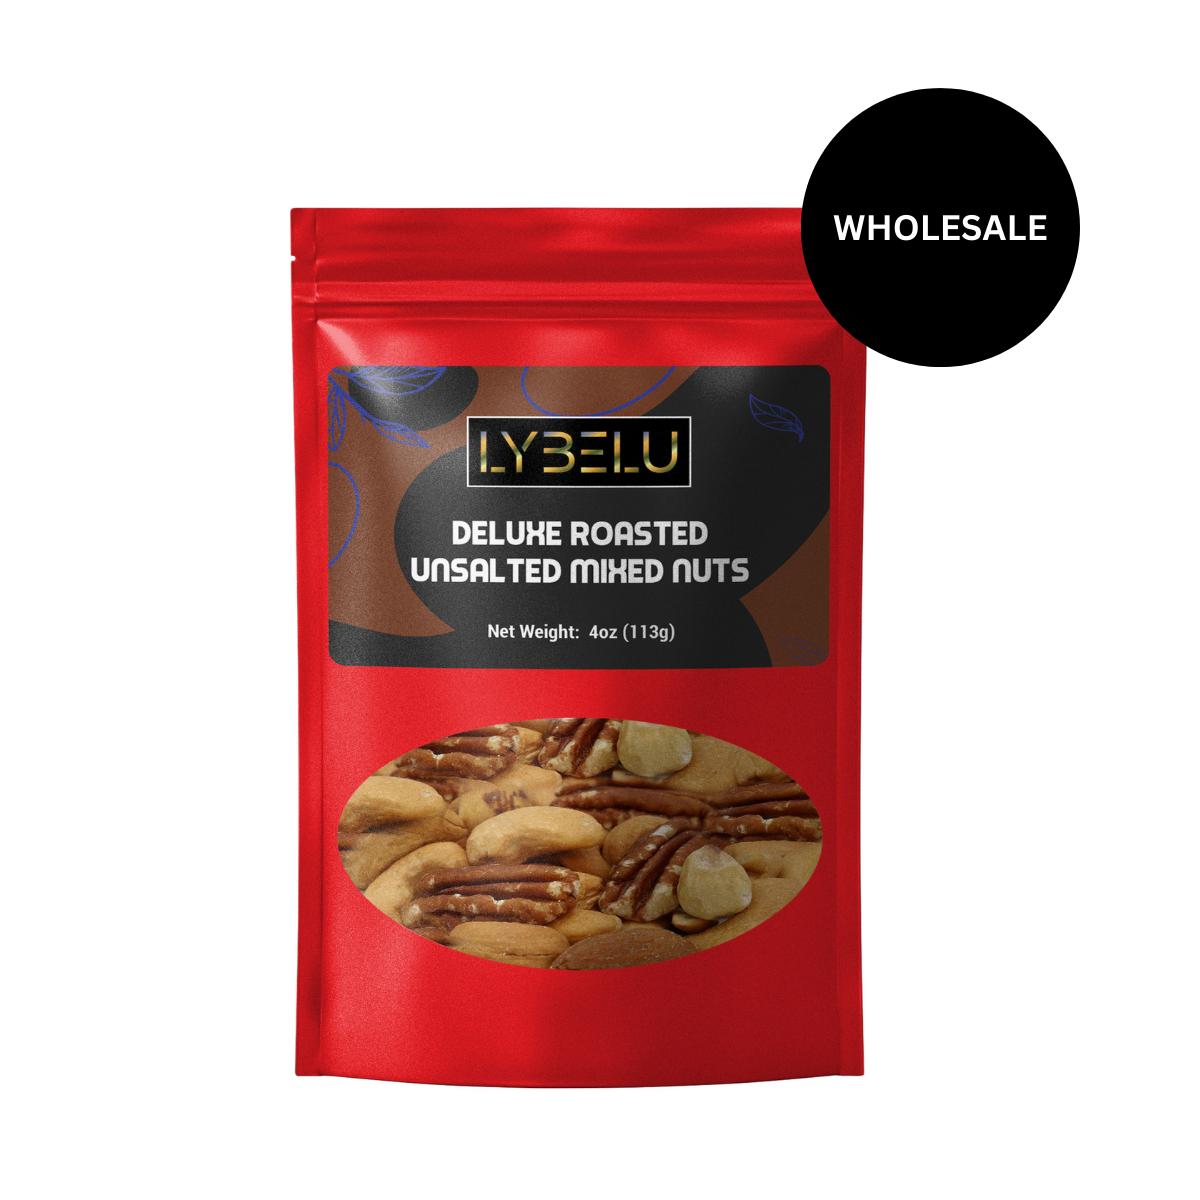 Deluxe Roasted Unsalted Mixed Nuts – 4oz